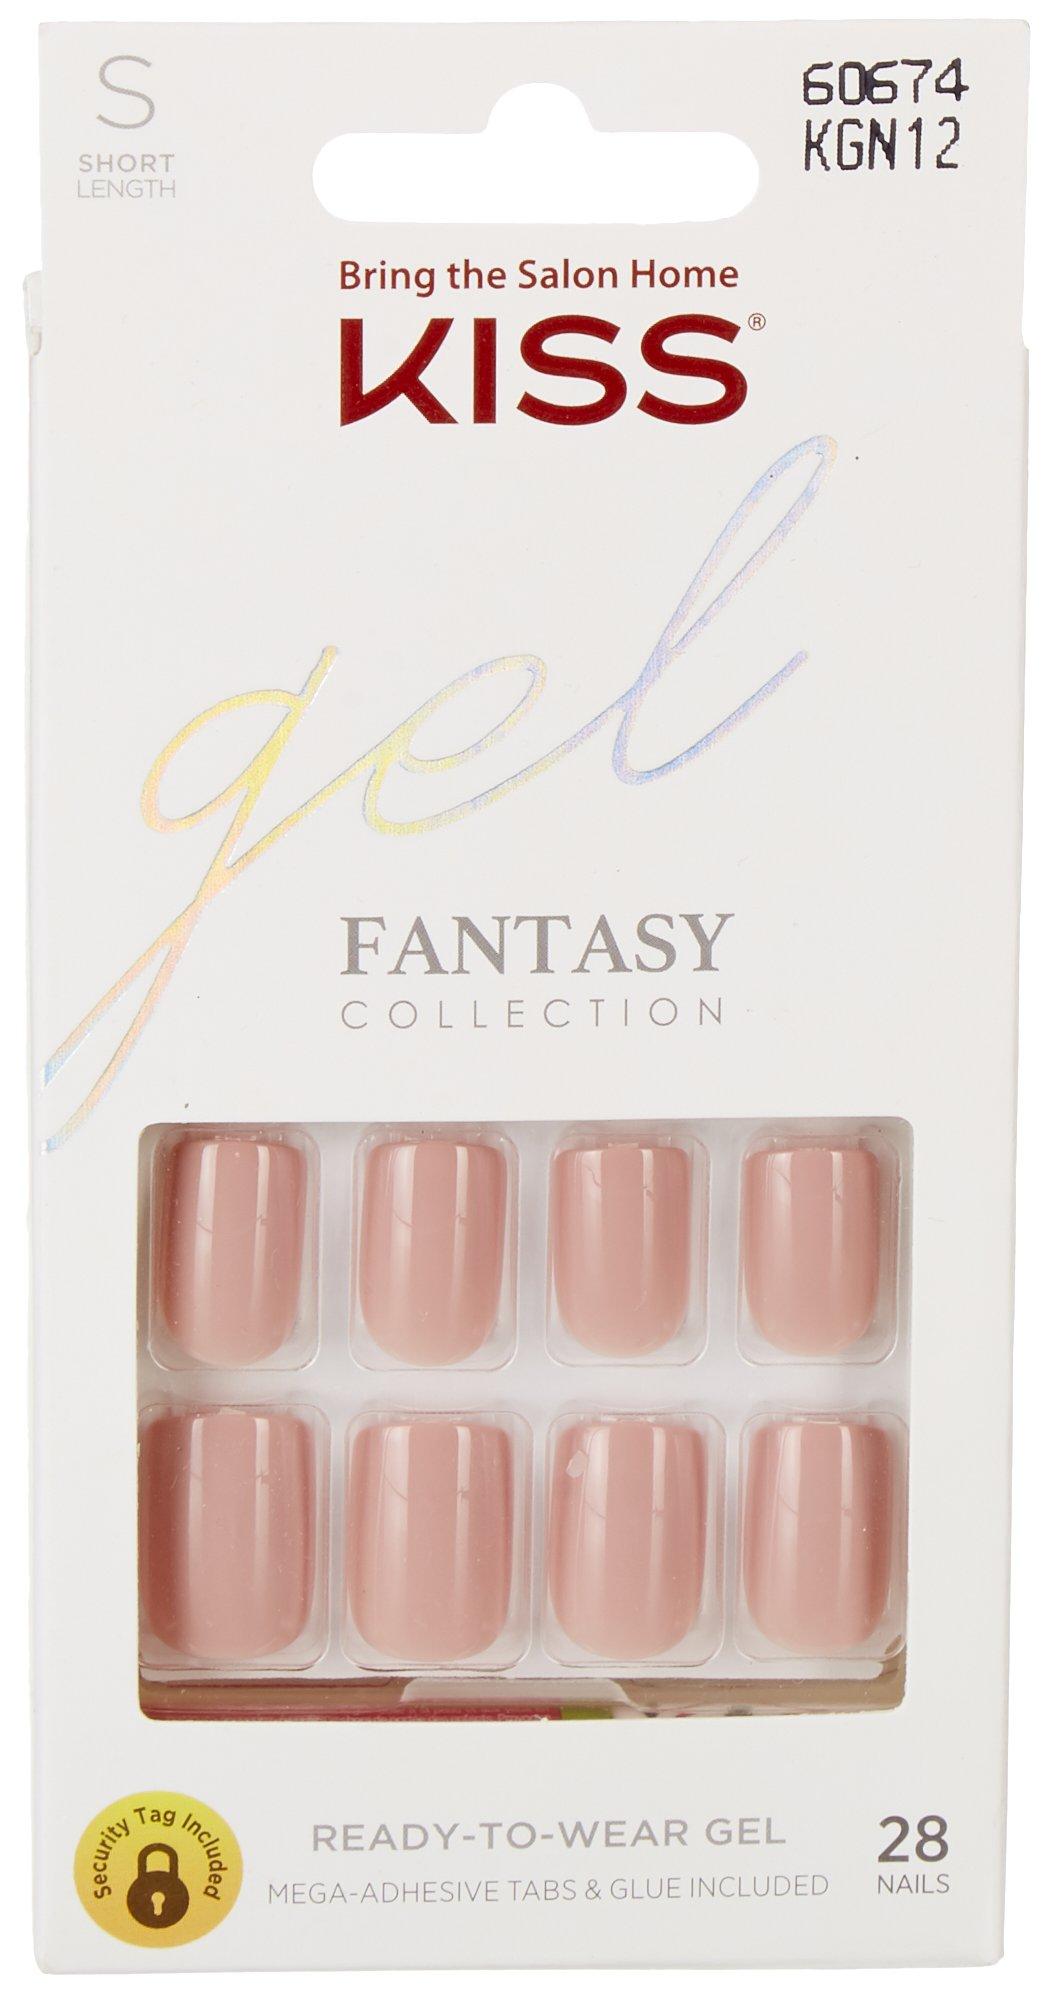 Kiss Fantasy Collection Short Length Gel Press-On Manicure